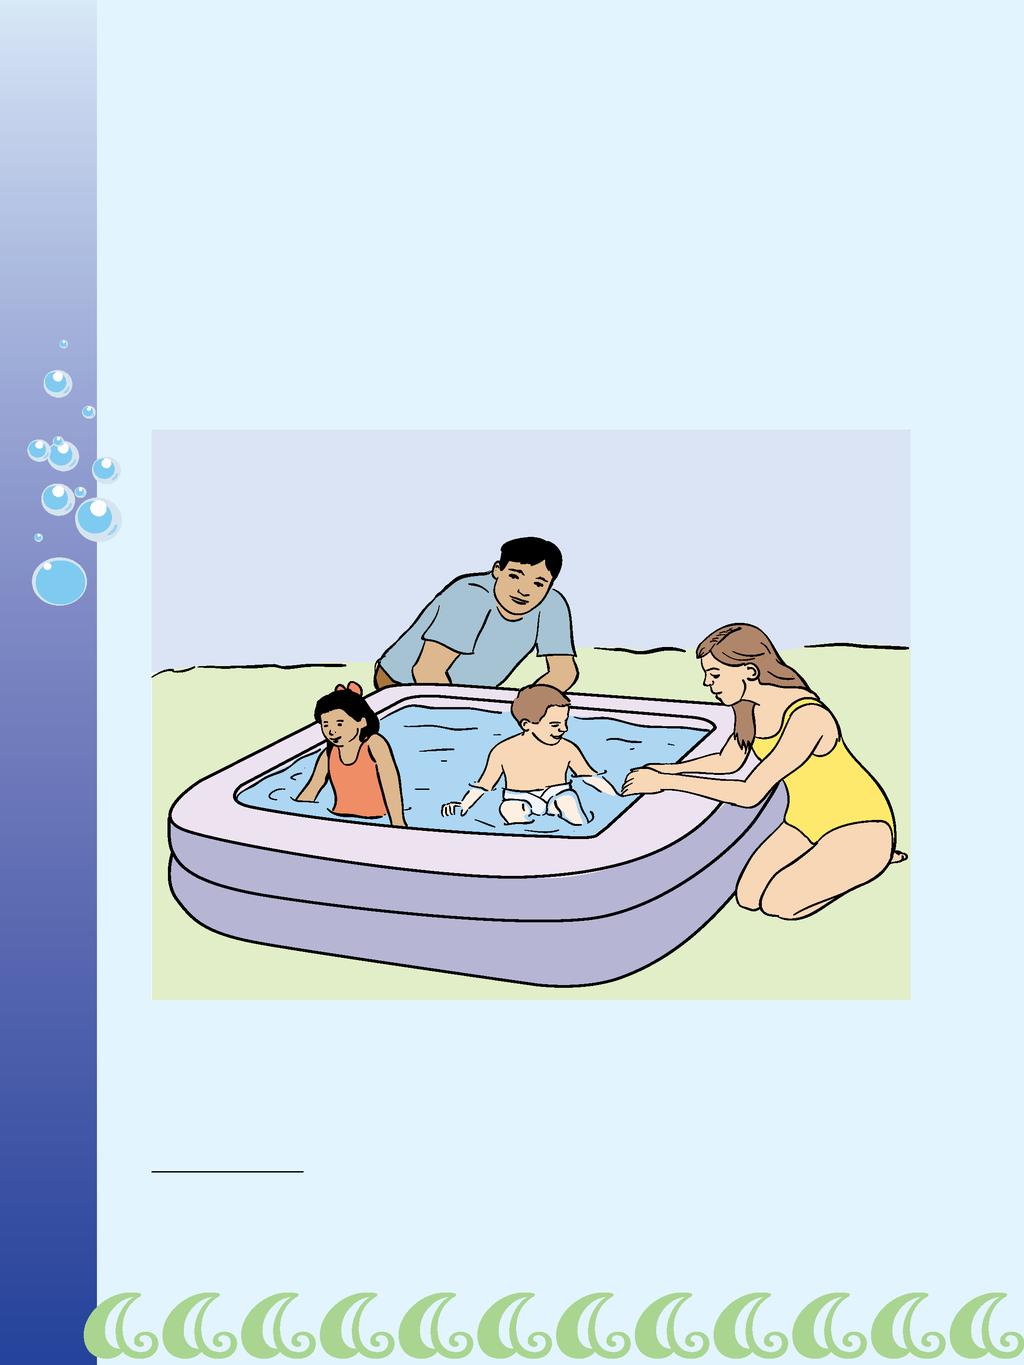 PROTECTION AGAINST RECREATIONAL WATER ILLNESSES SIX P-L-E-As FOR HEALTHY SWIMMING * You Can Choose to Swim Healthy!